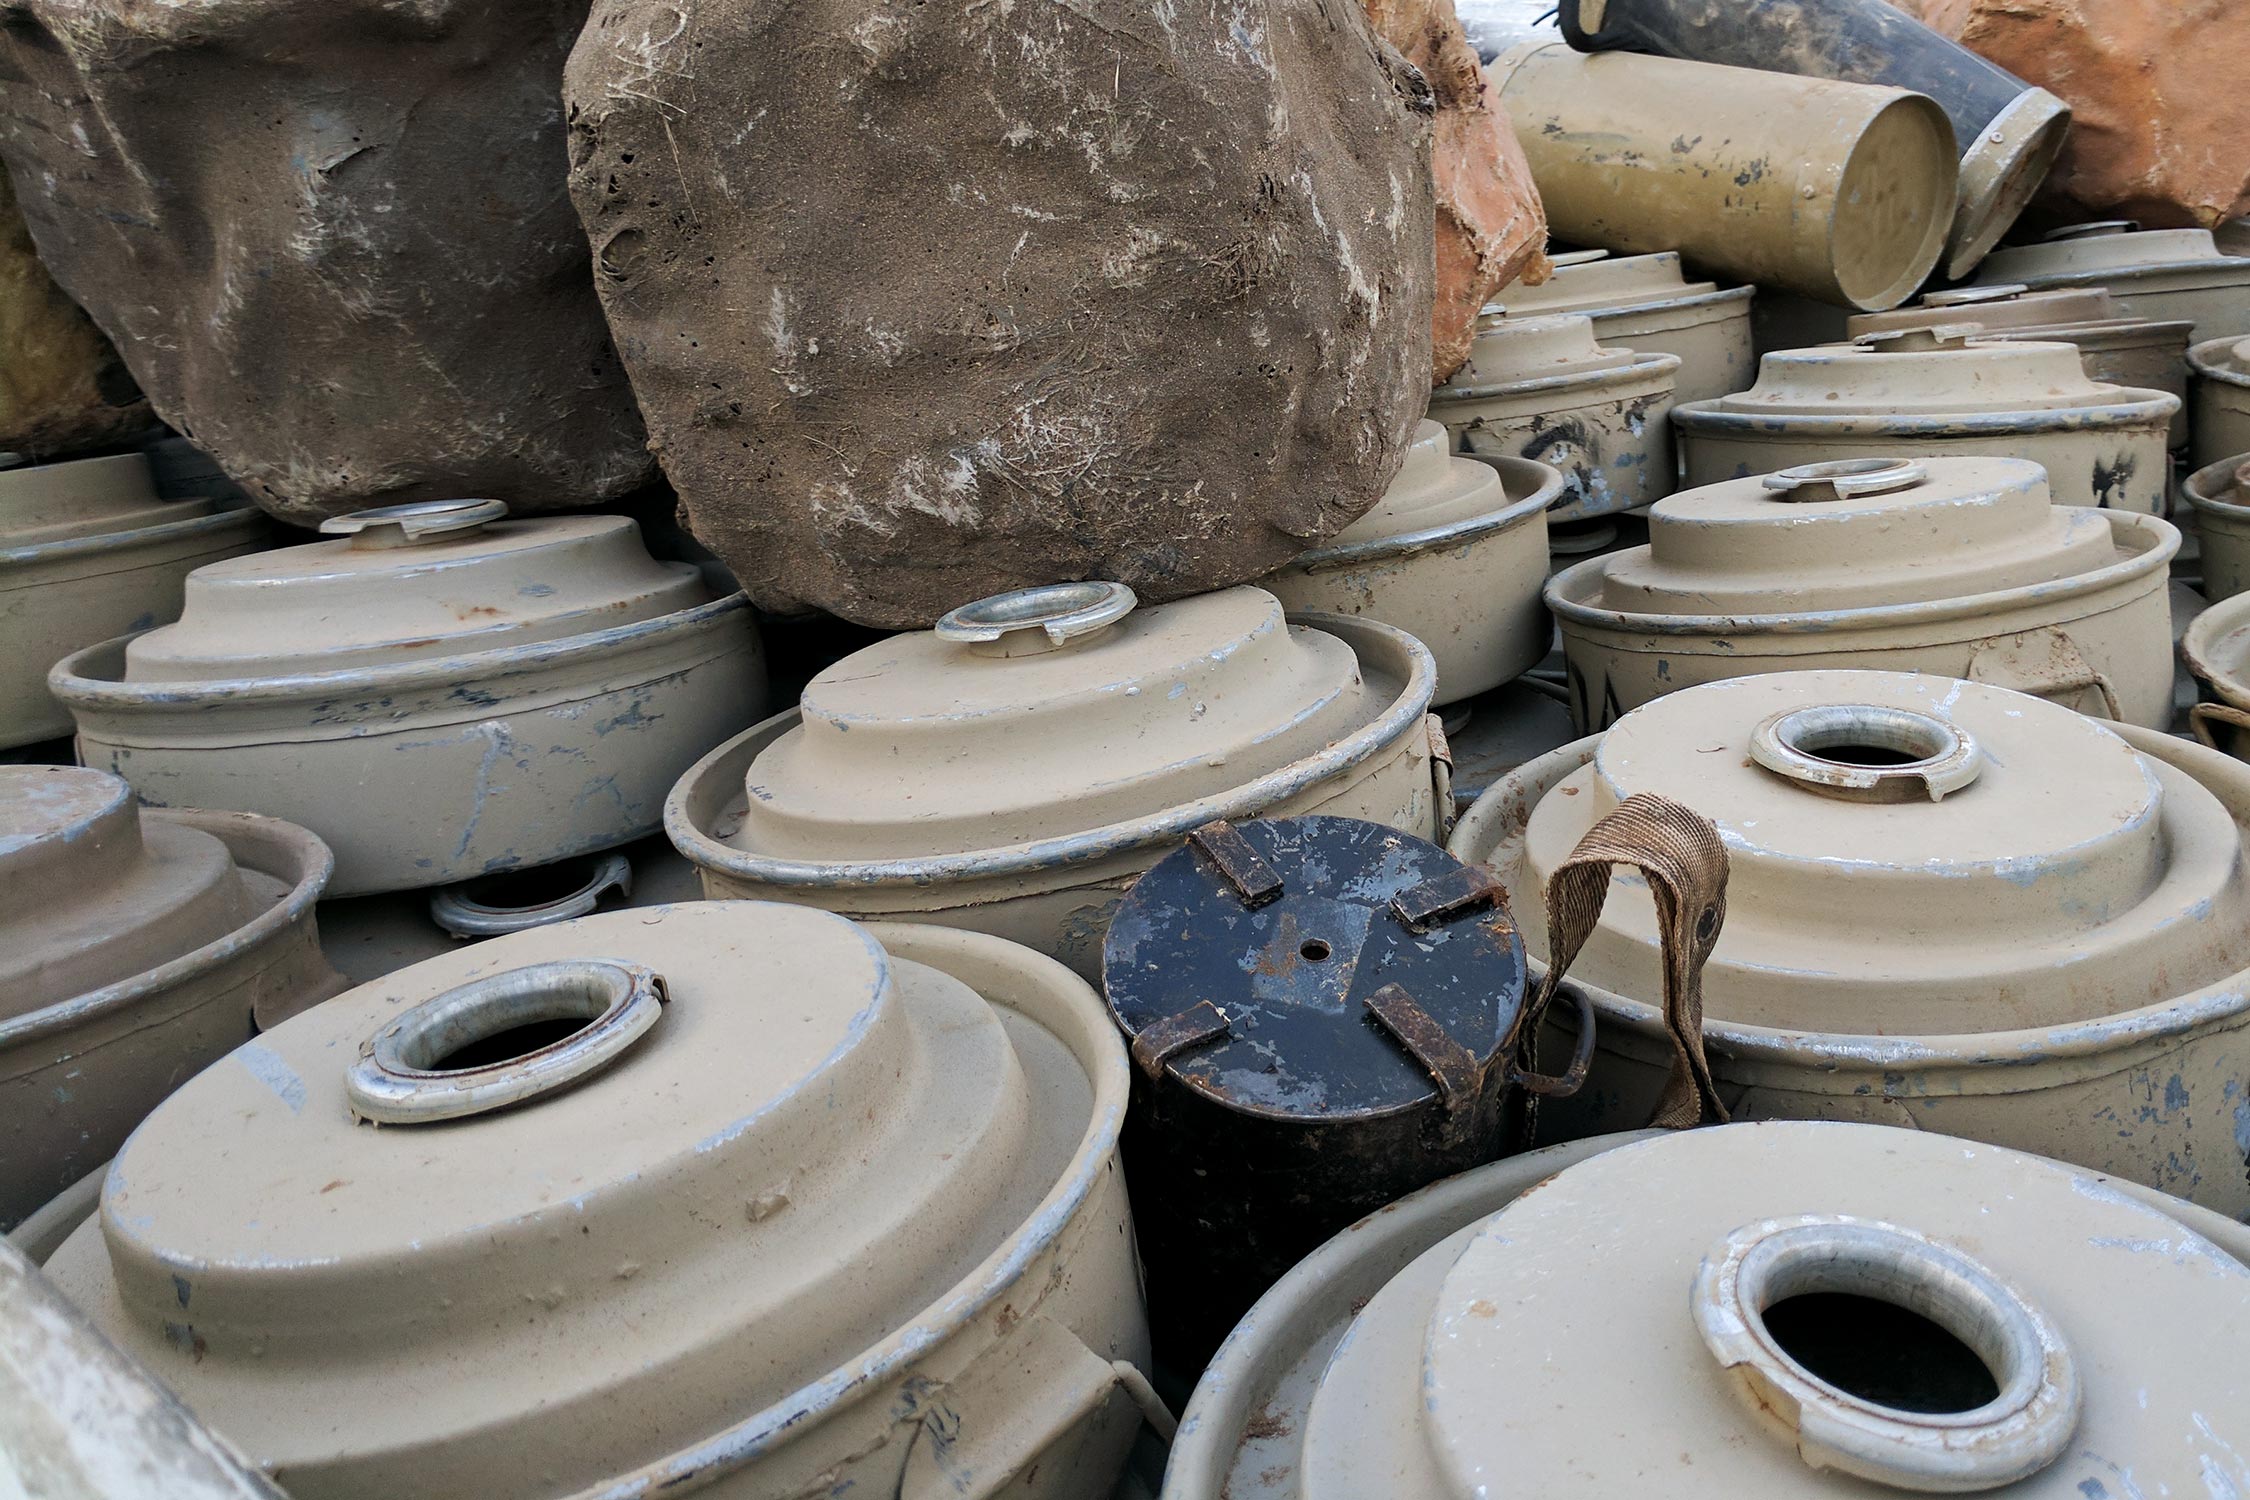 Mines and IEDs in Yemen